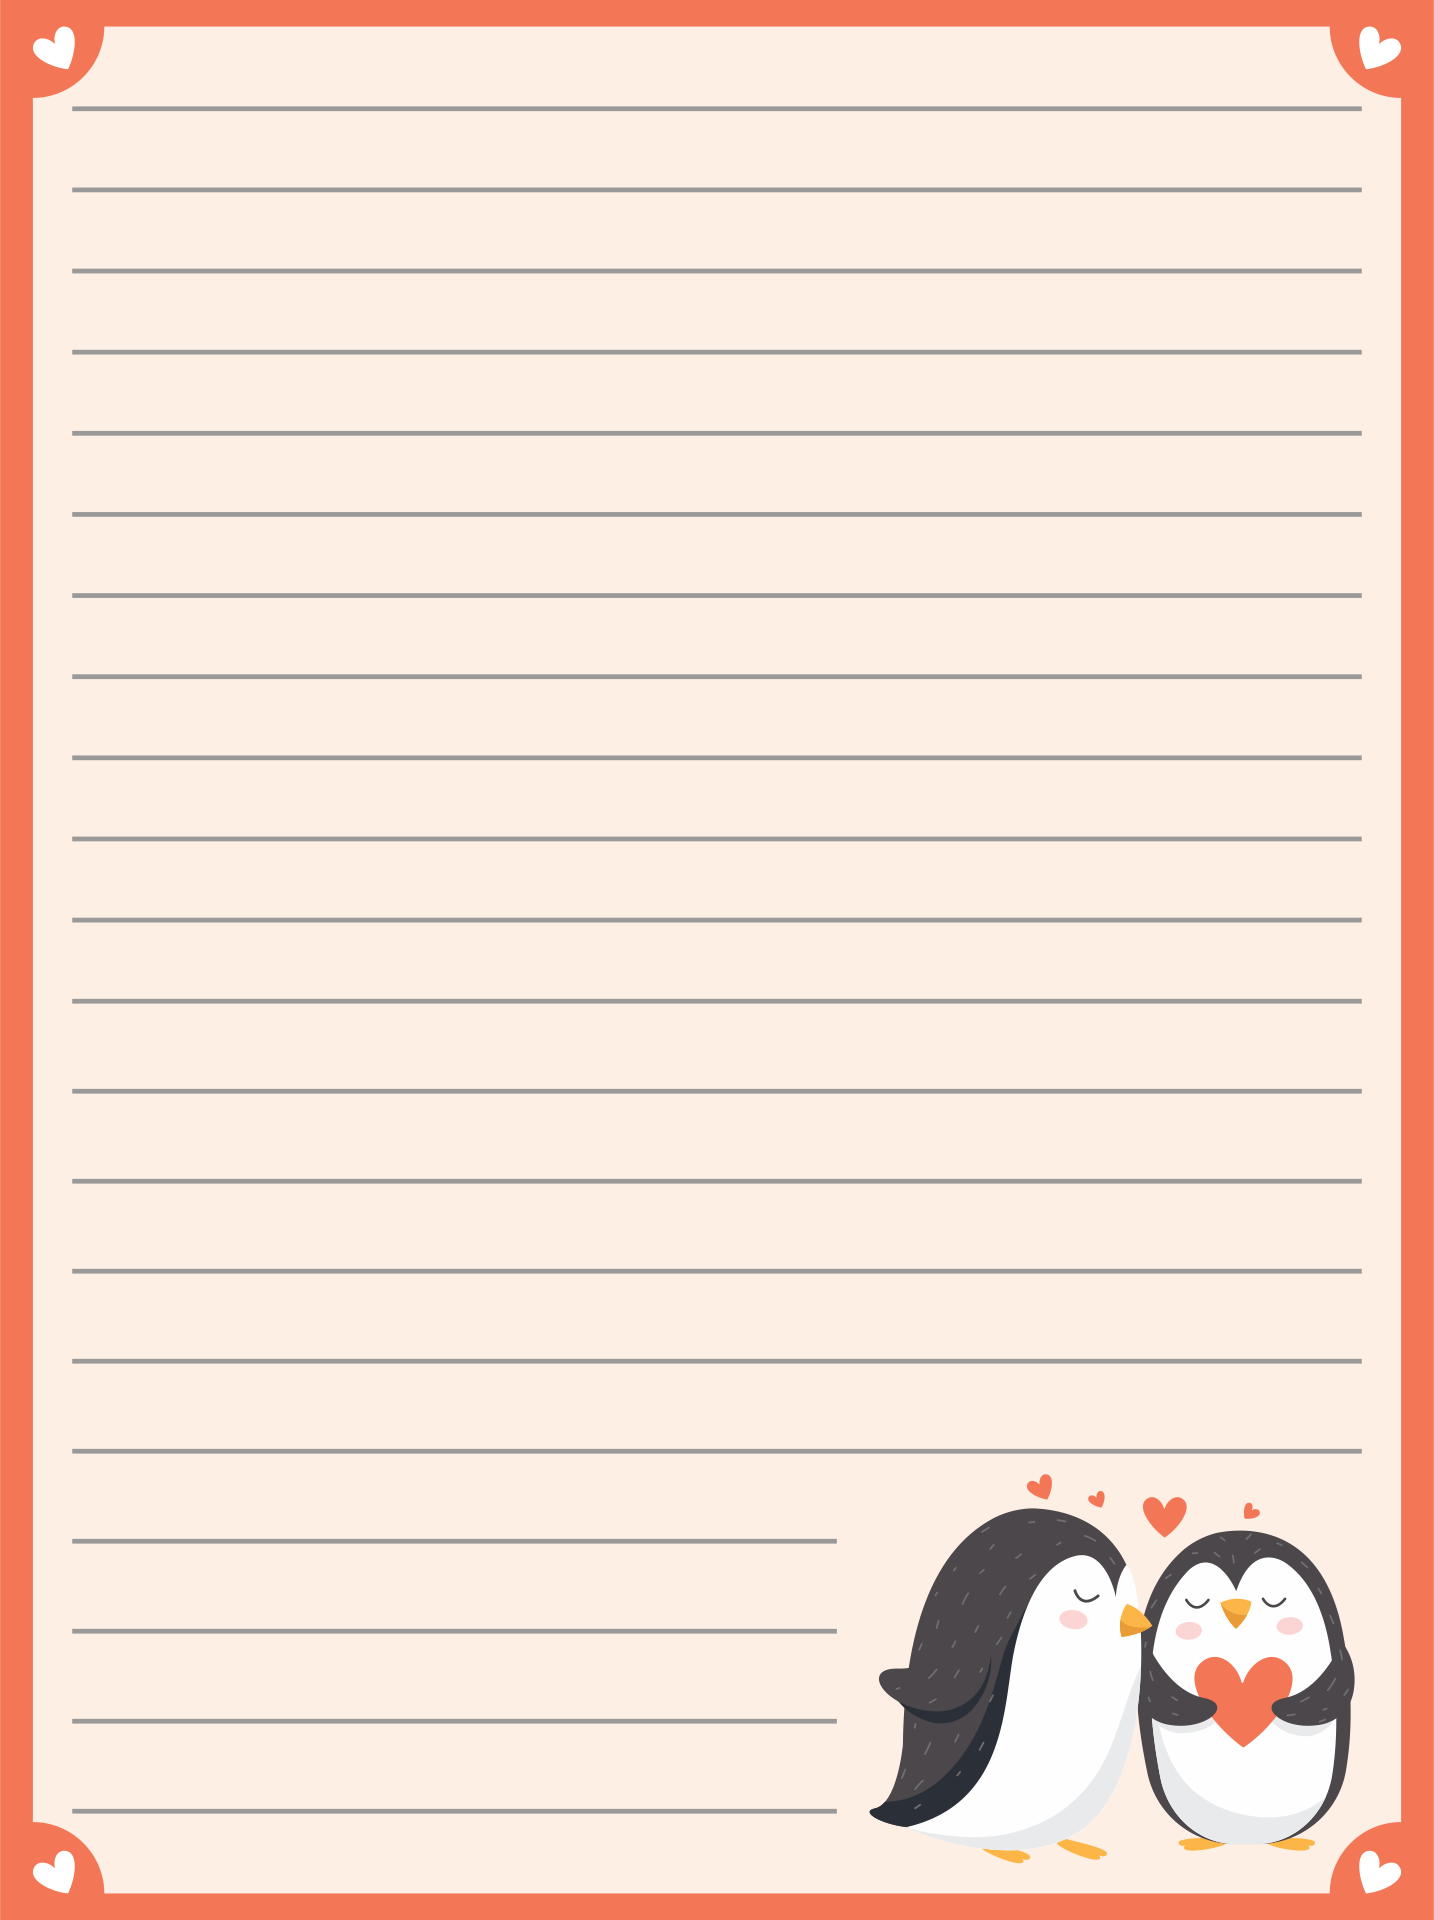 8 Best Images of Printable Love Letter Stationery Free Printable